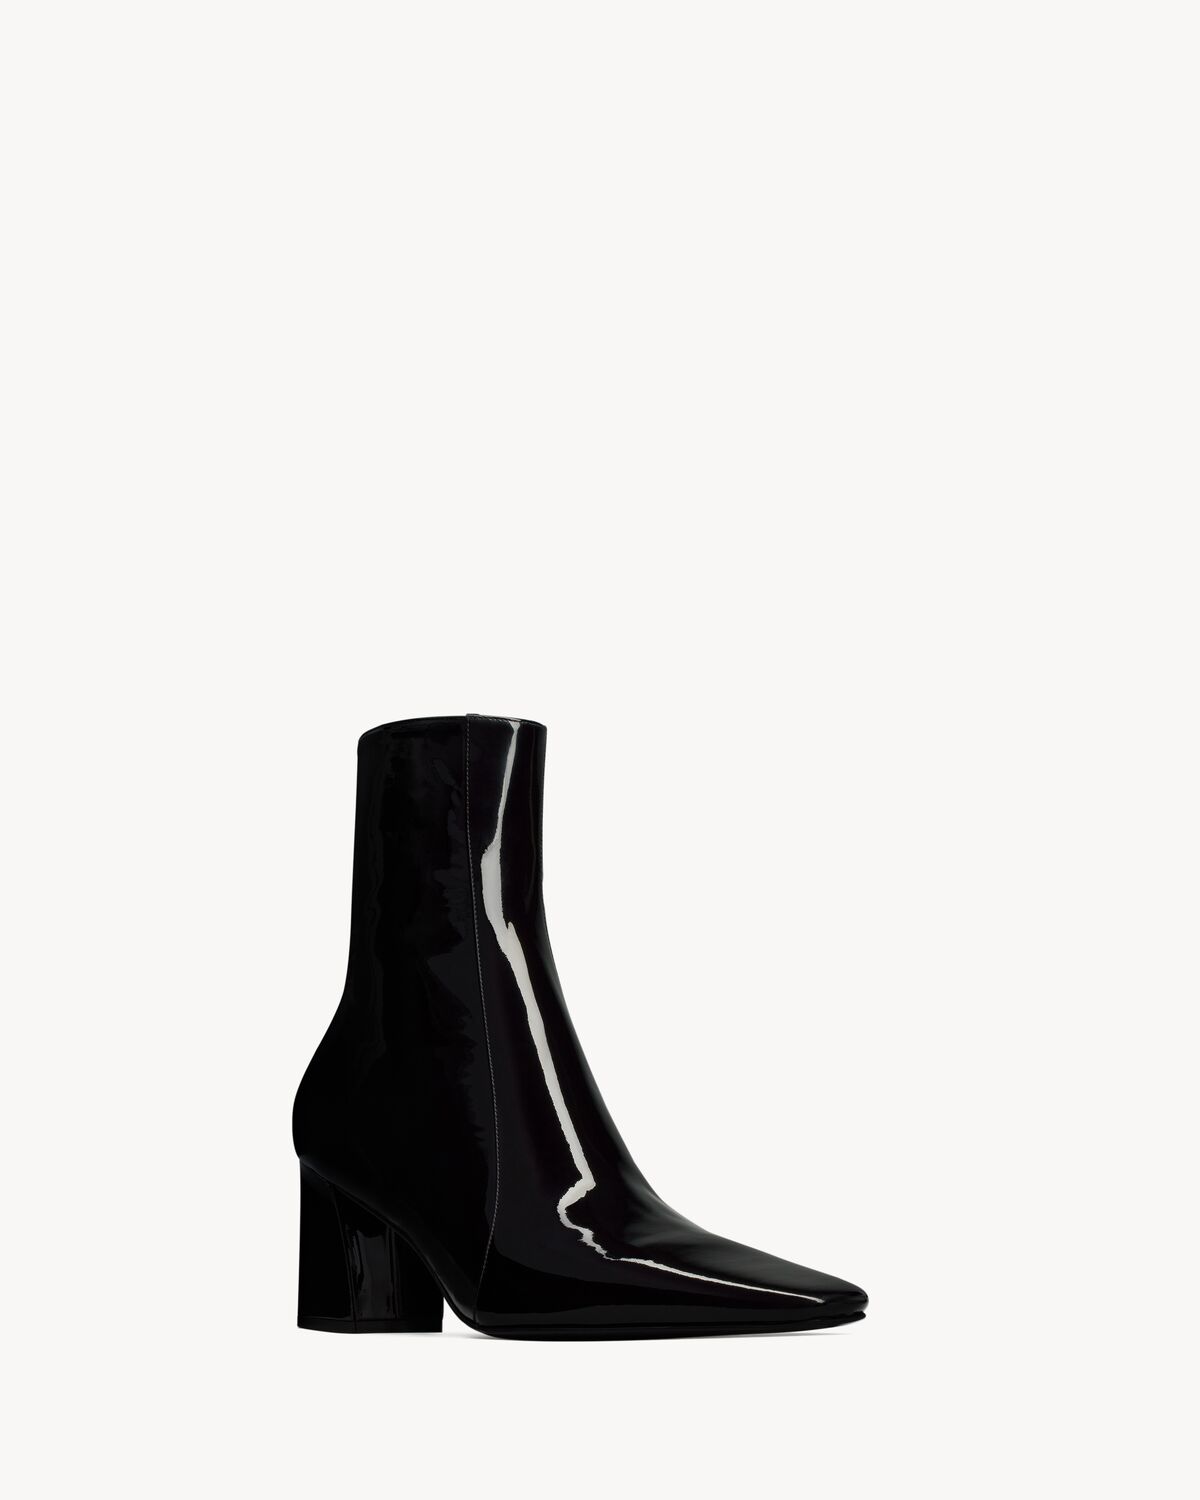 RAINER boots in patent leather